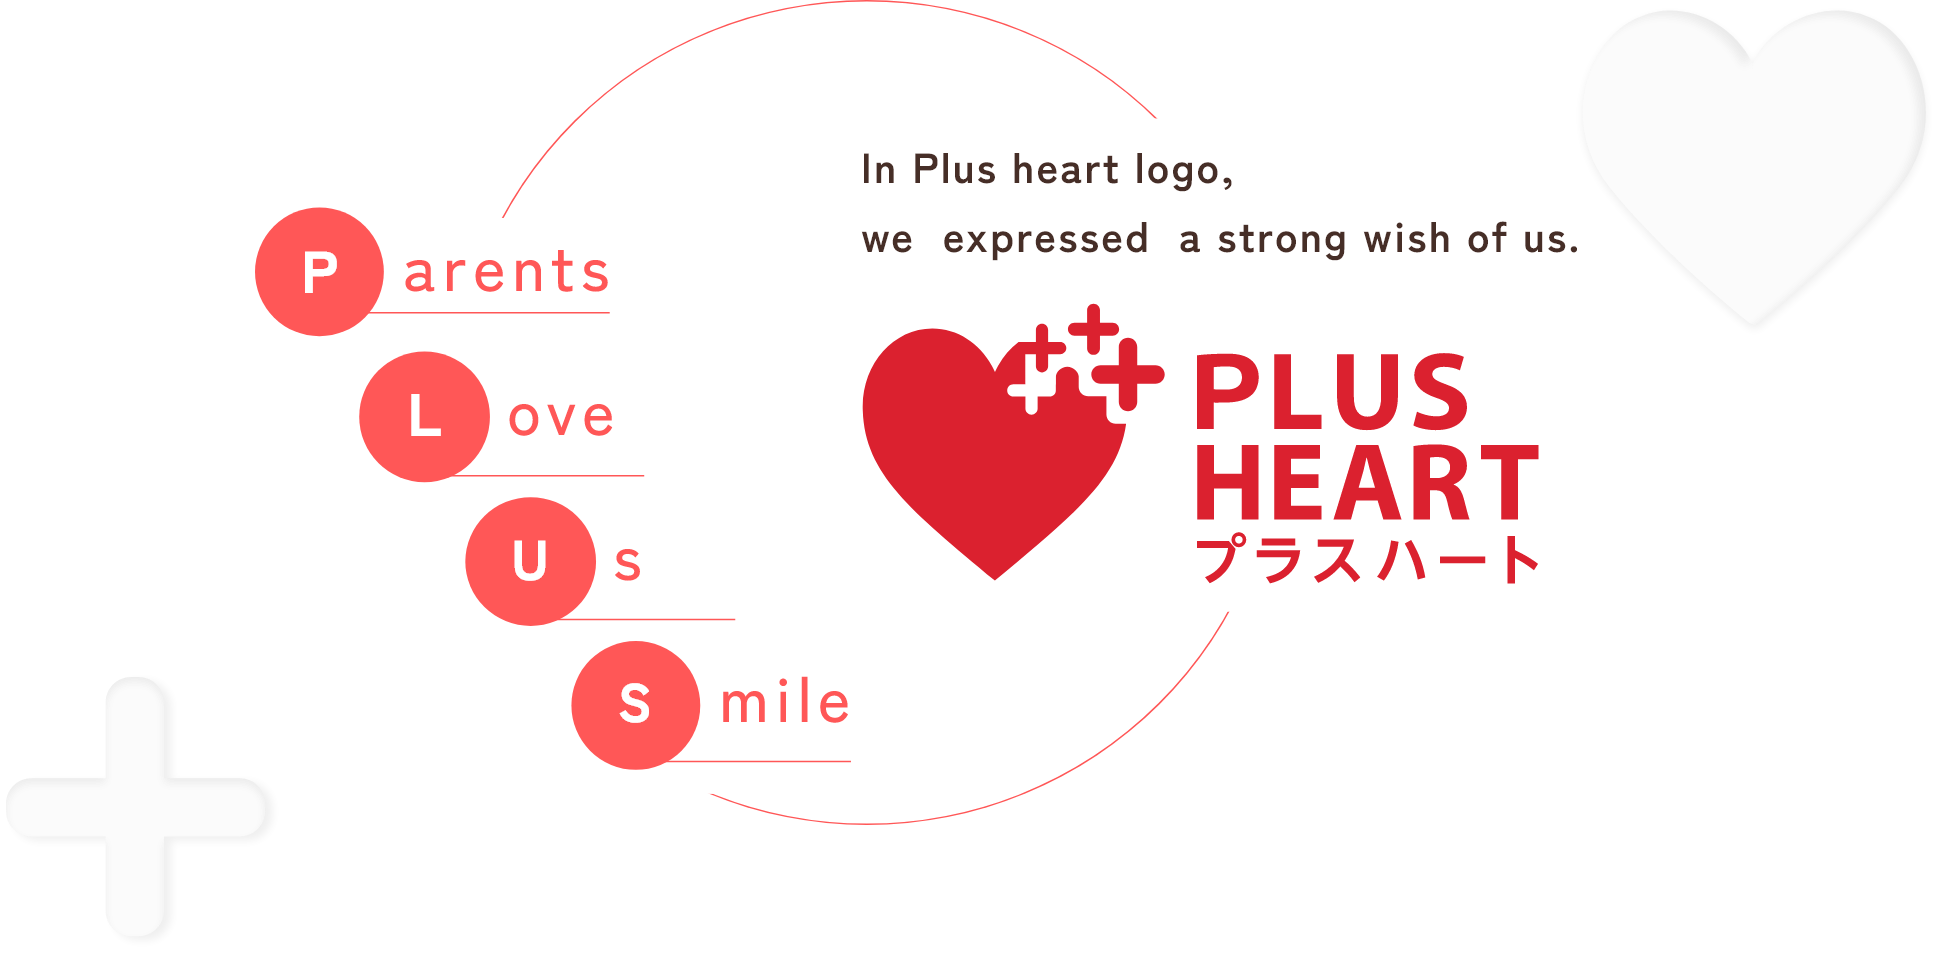 Parents Love Us Smile In Plus heart logo,we expressed a strong wish of us PLUS HEART プラスハート